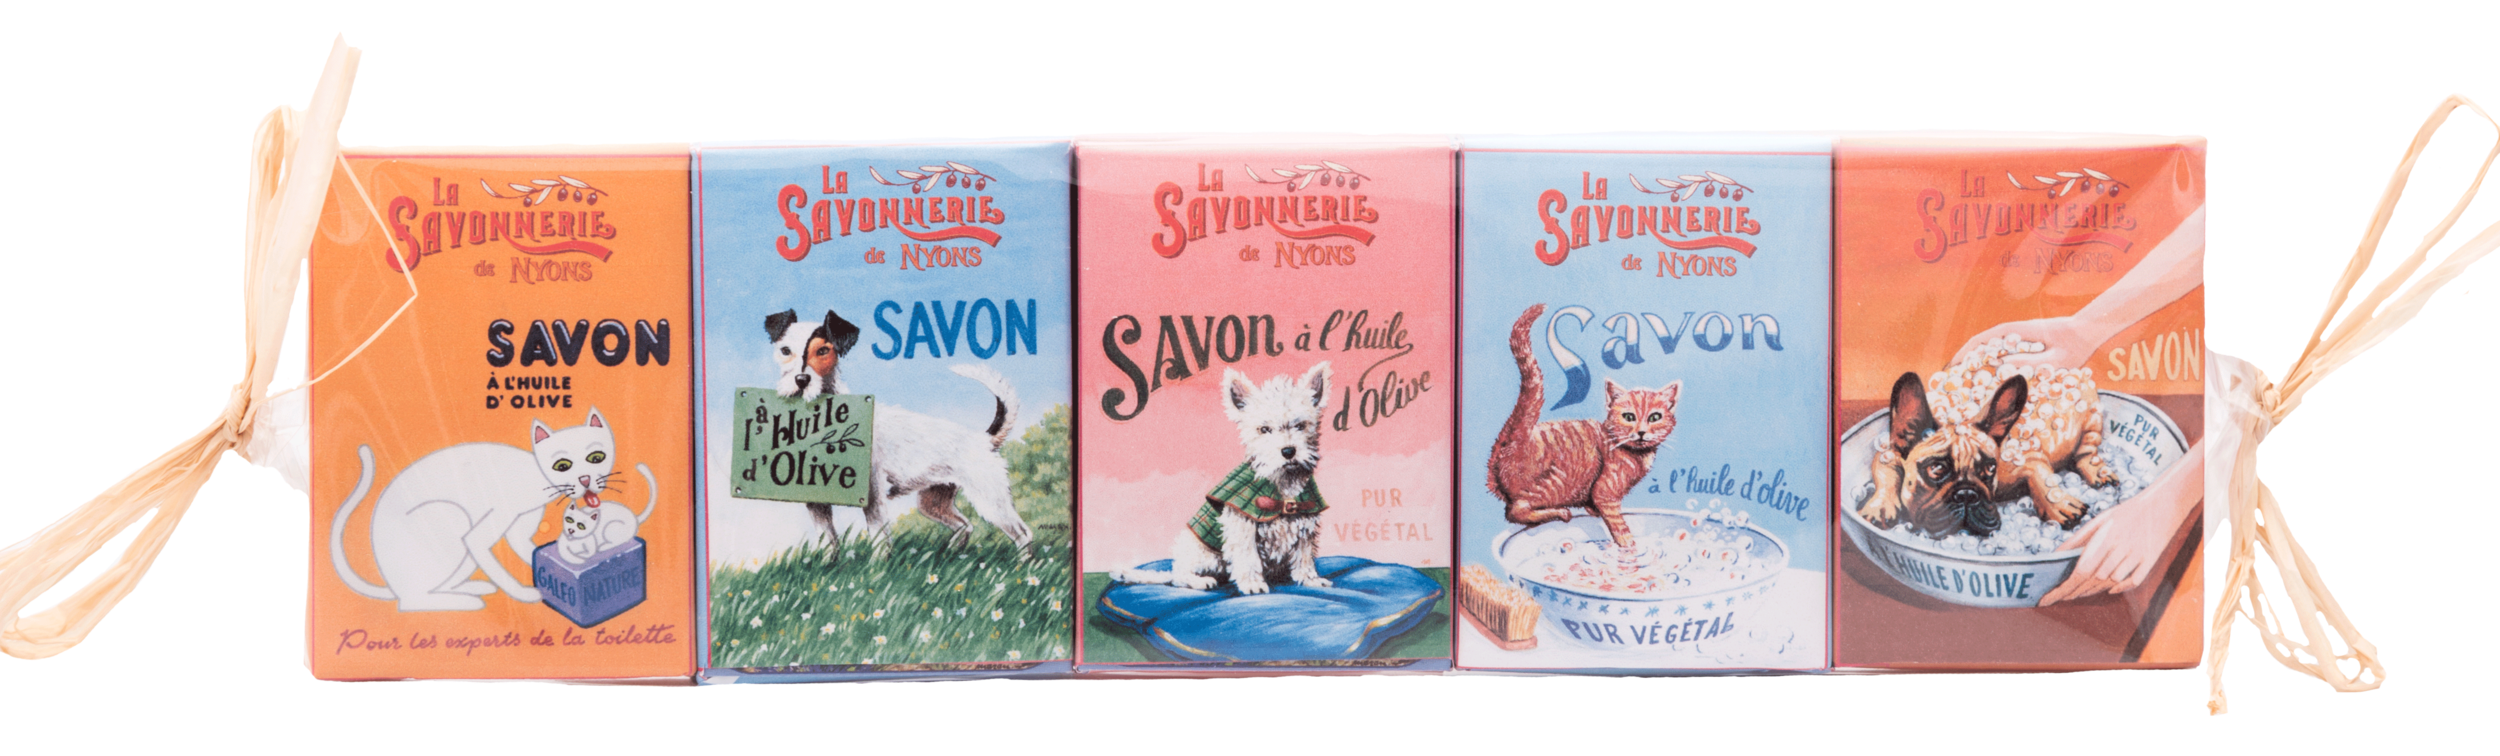 Papillote Animaux & Savons 5x25g